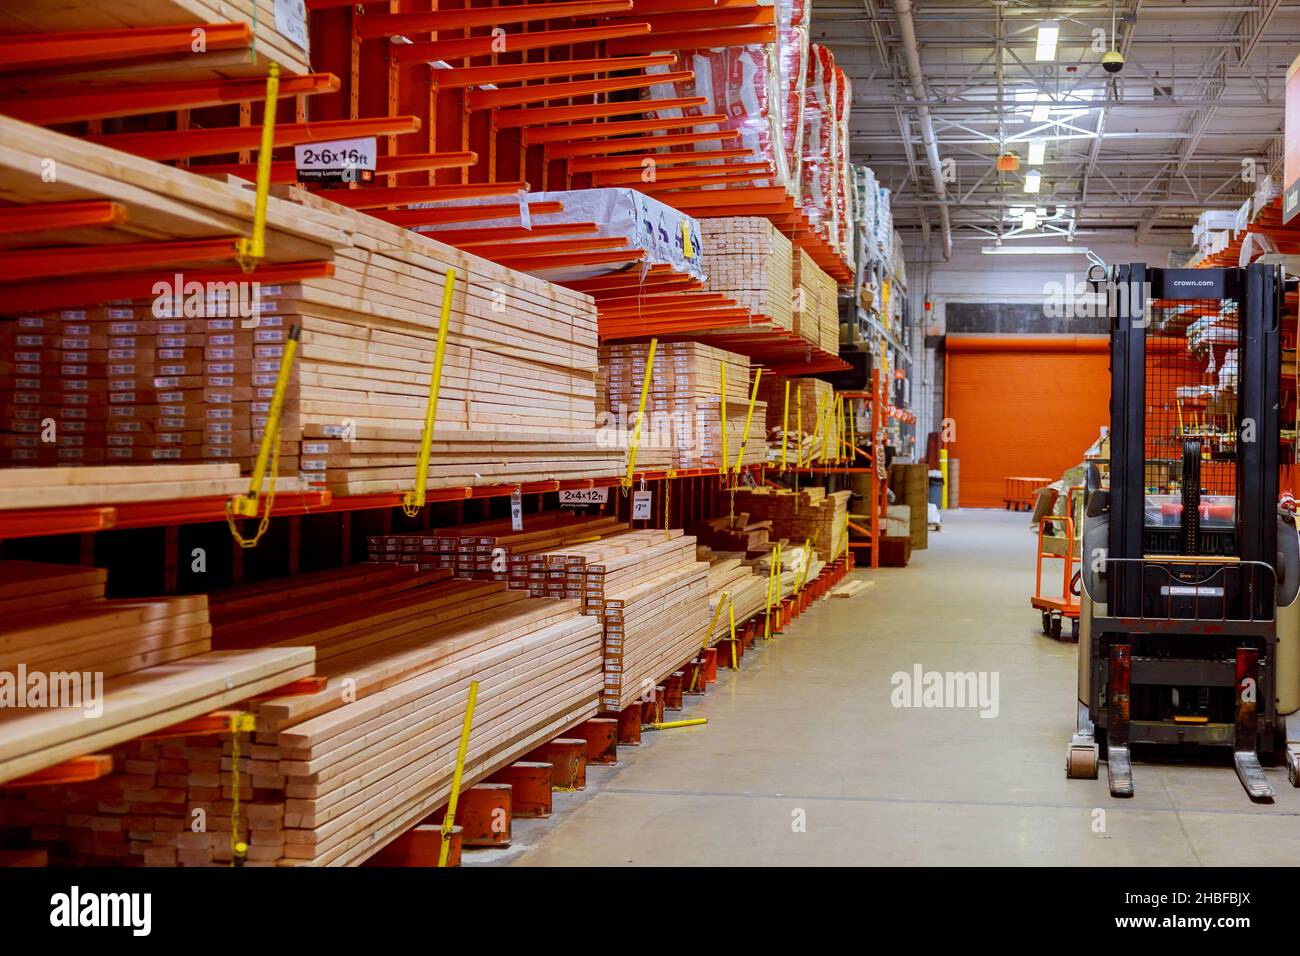 Lumber section of Home Depot store Stock Photo